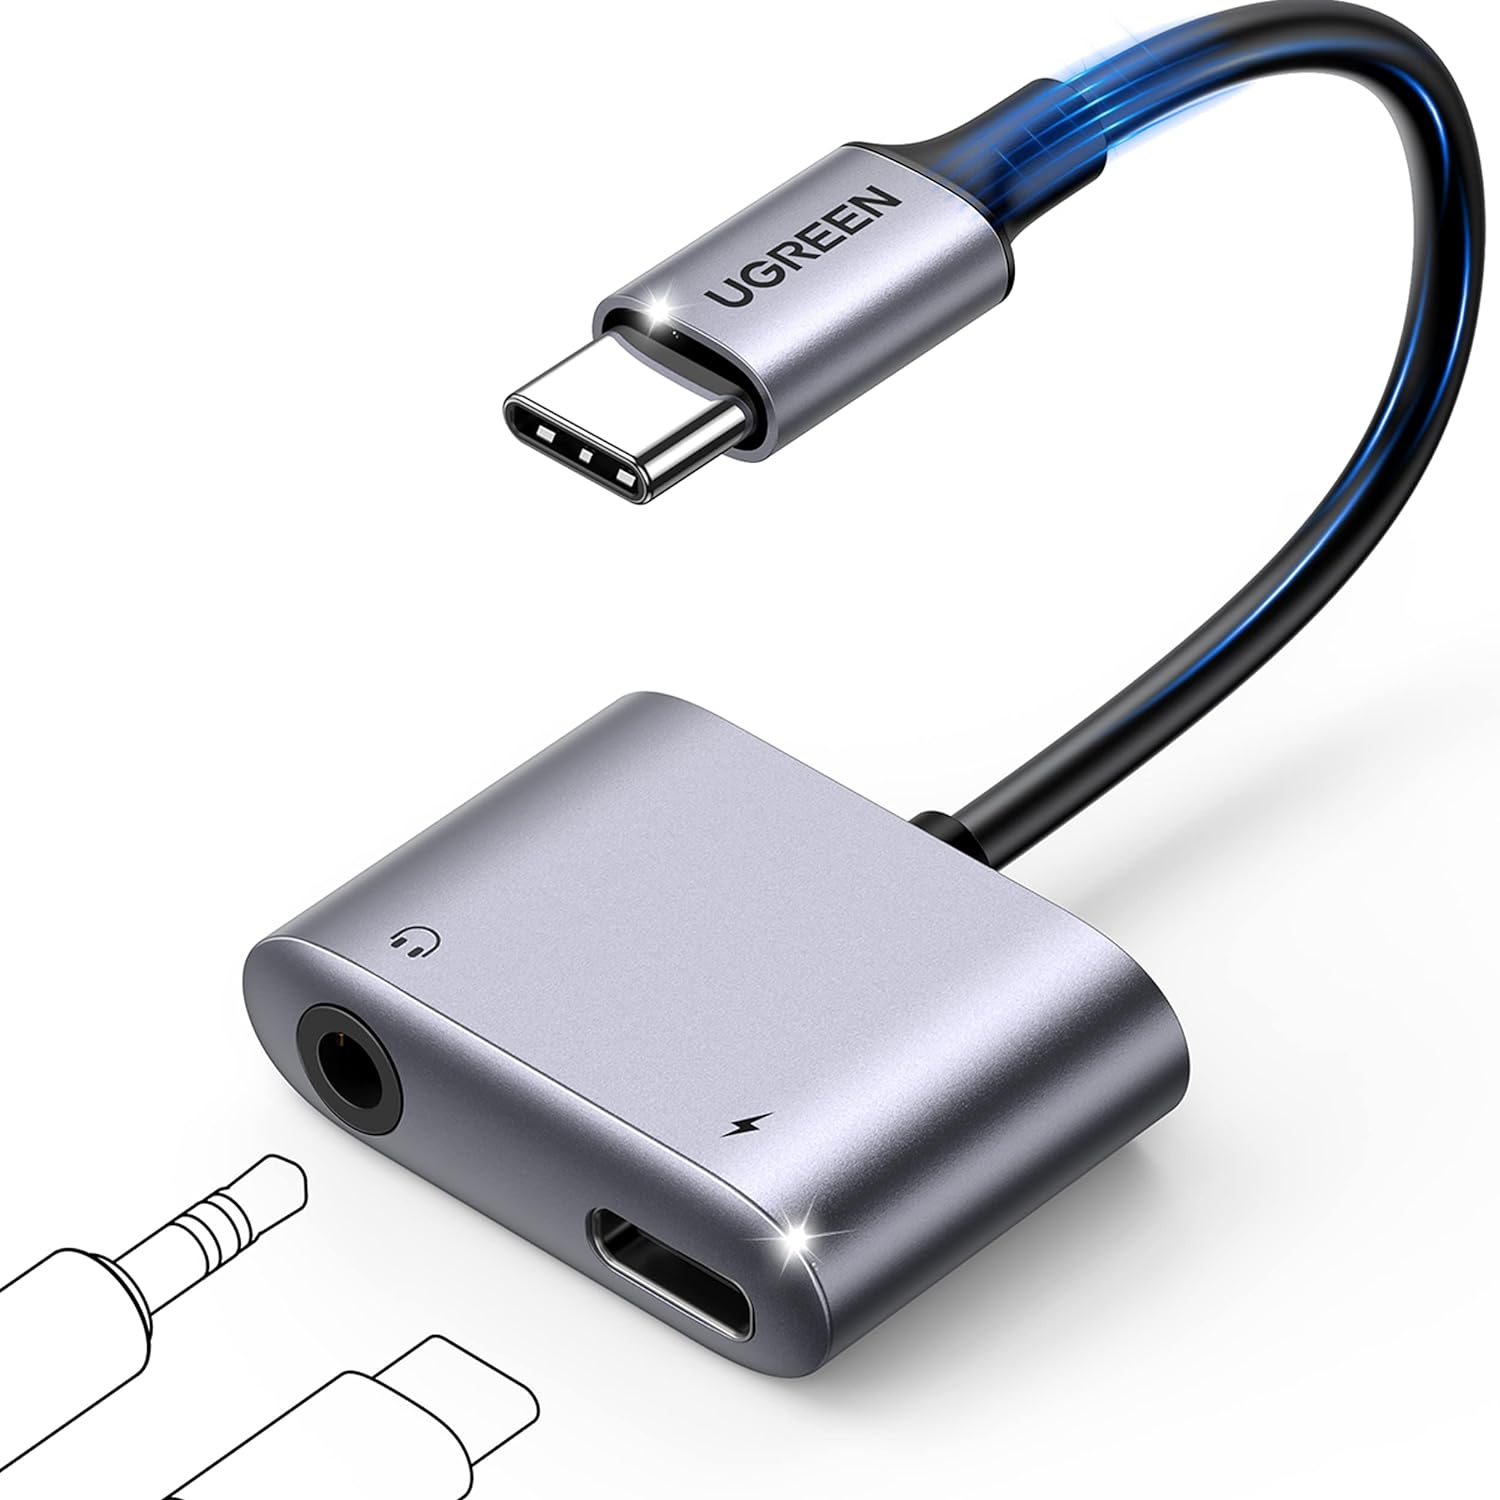 UGREEN USB C to 3.5mm Jack and Charger Adapter DAC PD 60W Fast Charge Type C Headphone Aux Splitter